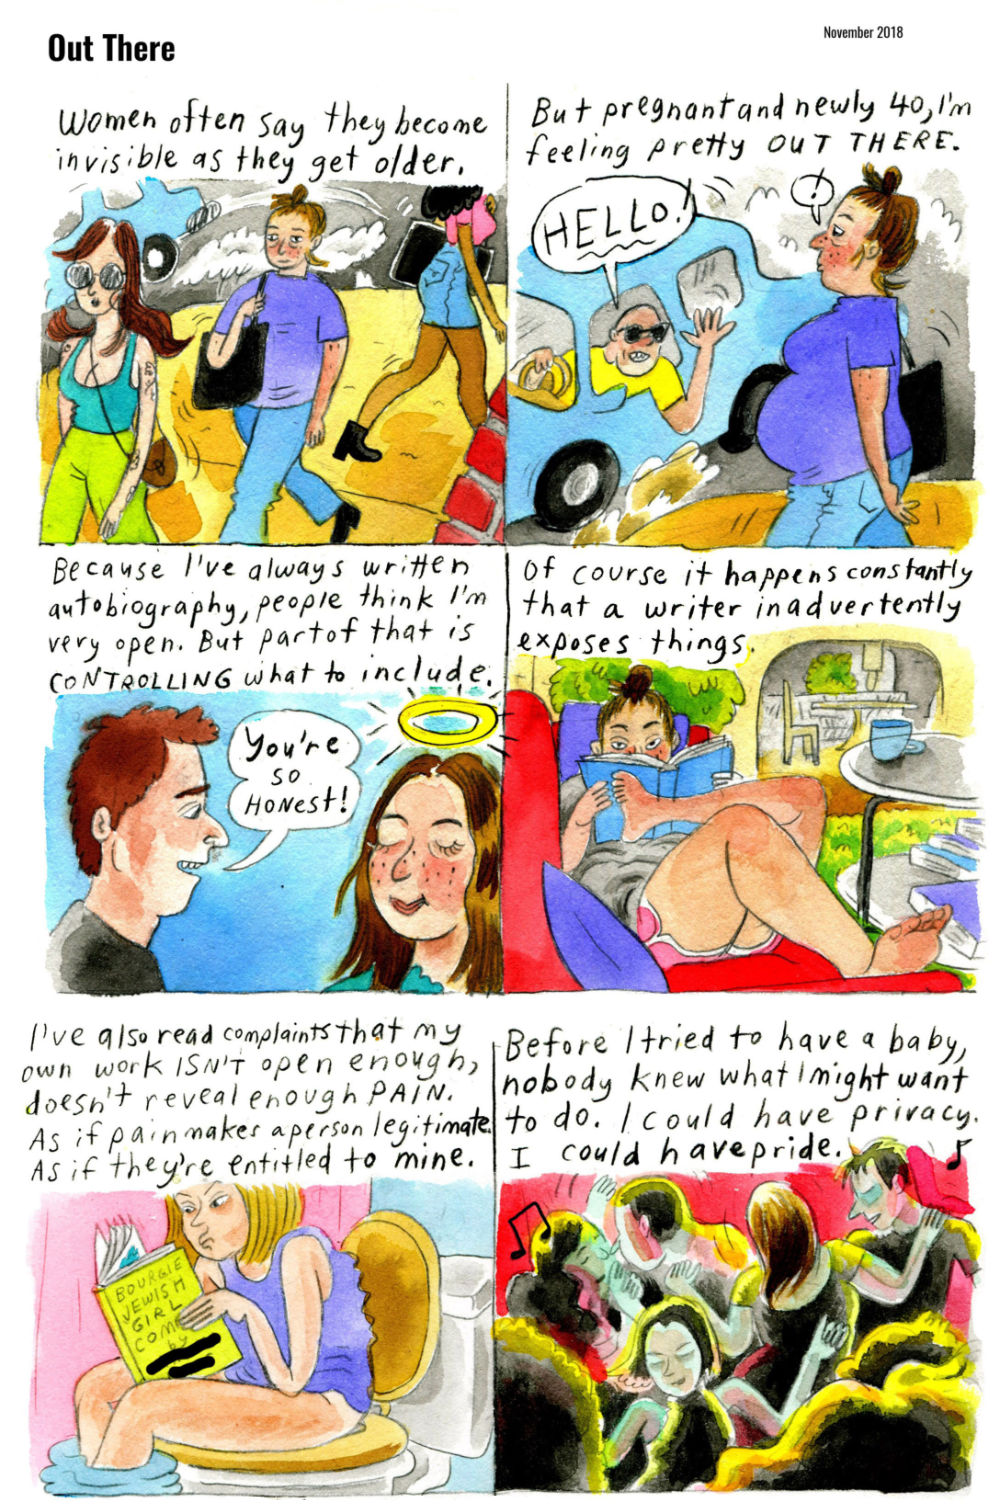 The page shows 6 panels enclosed by borders. There are no gutters separating the panels. The drawings are brightly colored with watercolor paint, or something resembling it.

1. "Women often say they become invisible as they get older." Vanessa walks in a crowd, sandwiched by two fashionable younger women walking in different directions.

2. "But pregnant and newly 40, I'm feeling pretty OUT THERE."
A man shouts "HELLO!" at Vanessa, waving from his blue car. She pauses, alarmed. She is viewed from the side, where her pregnant belly is clearly visible.

3. "Because I've always written autobiography, people think I'm very open. But part of that is CONTROLLING what to include."
A man tells Vanessa, "You're so honest!" She smiles, satisfied, with a halo shining above her head.

4. "Of course it happens constantly that a writer inadvertently exposes things."
Vanessa lounges on a couch reading a book. She wears shorts and a t-shirt, and her hair is in a bun.

5. "I've also read complaints that my own work ISN'T open enough, doesn't reveal enough PAIN. As if pain makes a person legitimate. As if they're entitled to mine."
A woman sits on the toilet, reading a book titled "Bougie Jewish Girl Comics by [REDACTED]." The woman looks critical, raising an eyebrow and hunching slightly to look at it closer.

6. "Before I tried to have a baby, nobody knew what I might want to do. I could have privacy. I could have pride."
Vanessa dances in a crowd at what seems like a nice club.